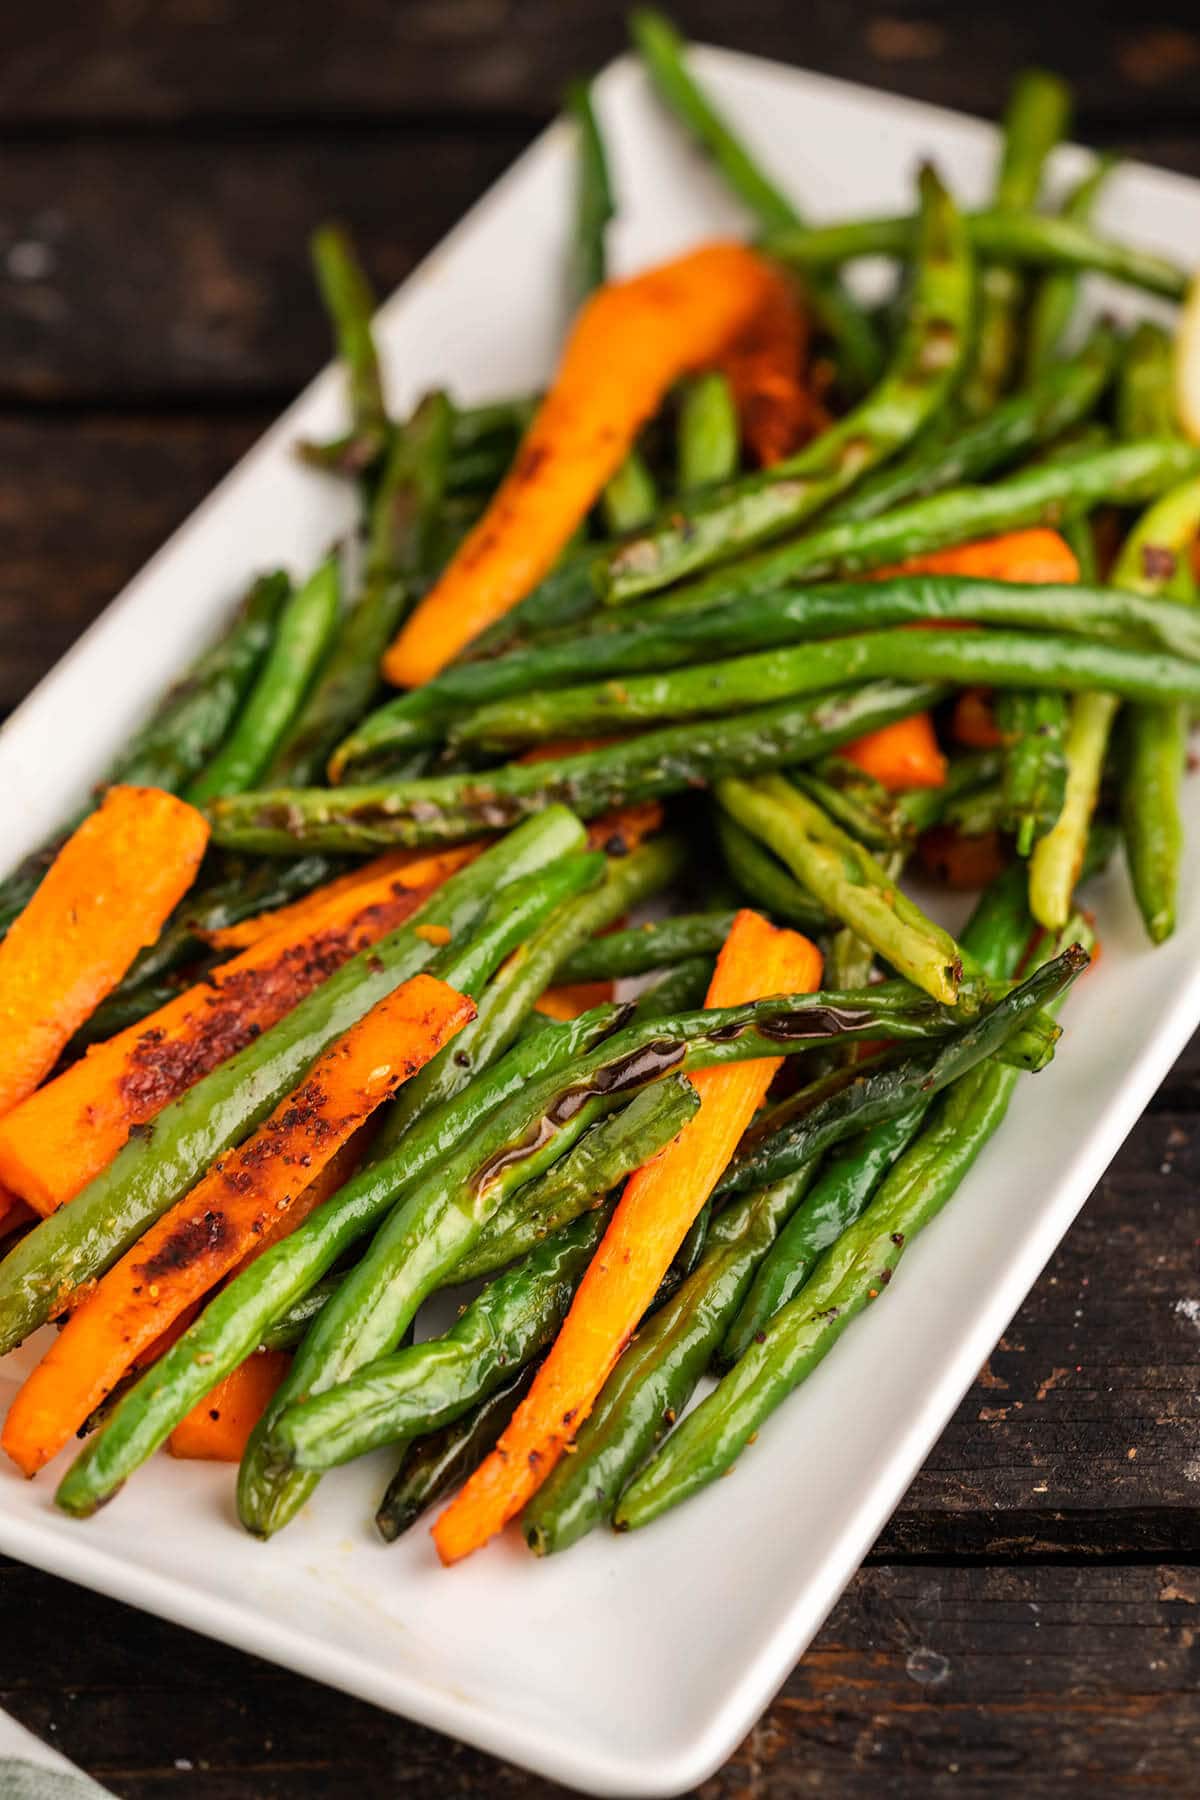  Oven Baked Green Beans and Carrots